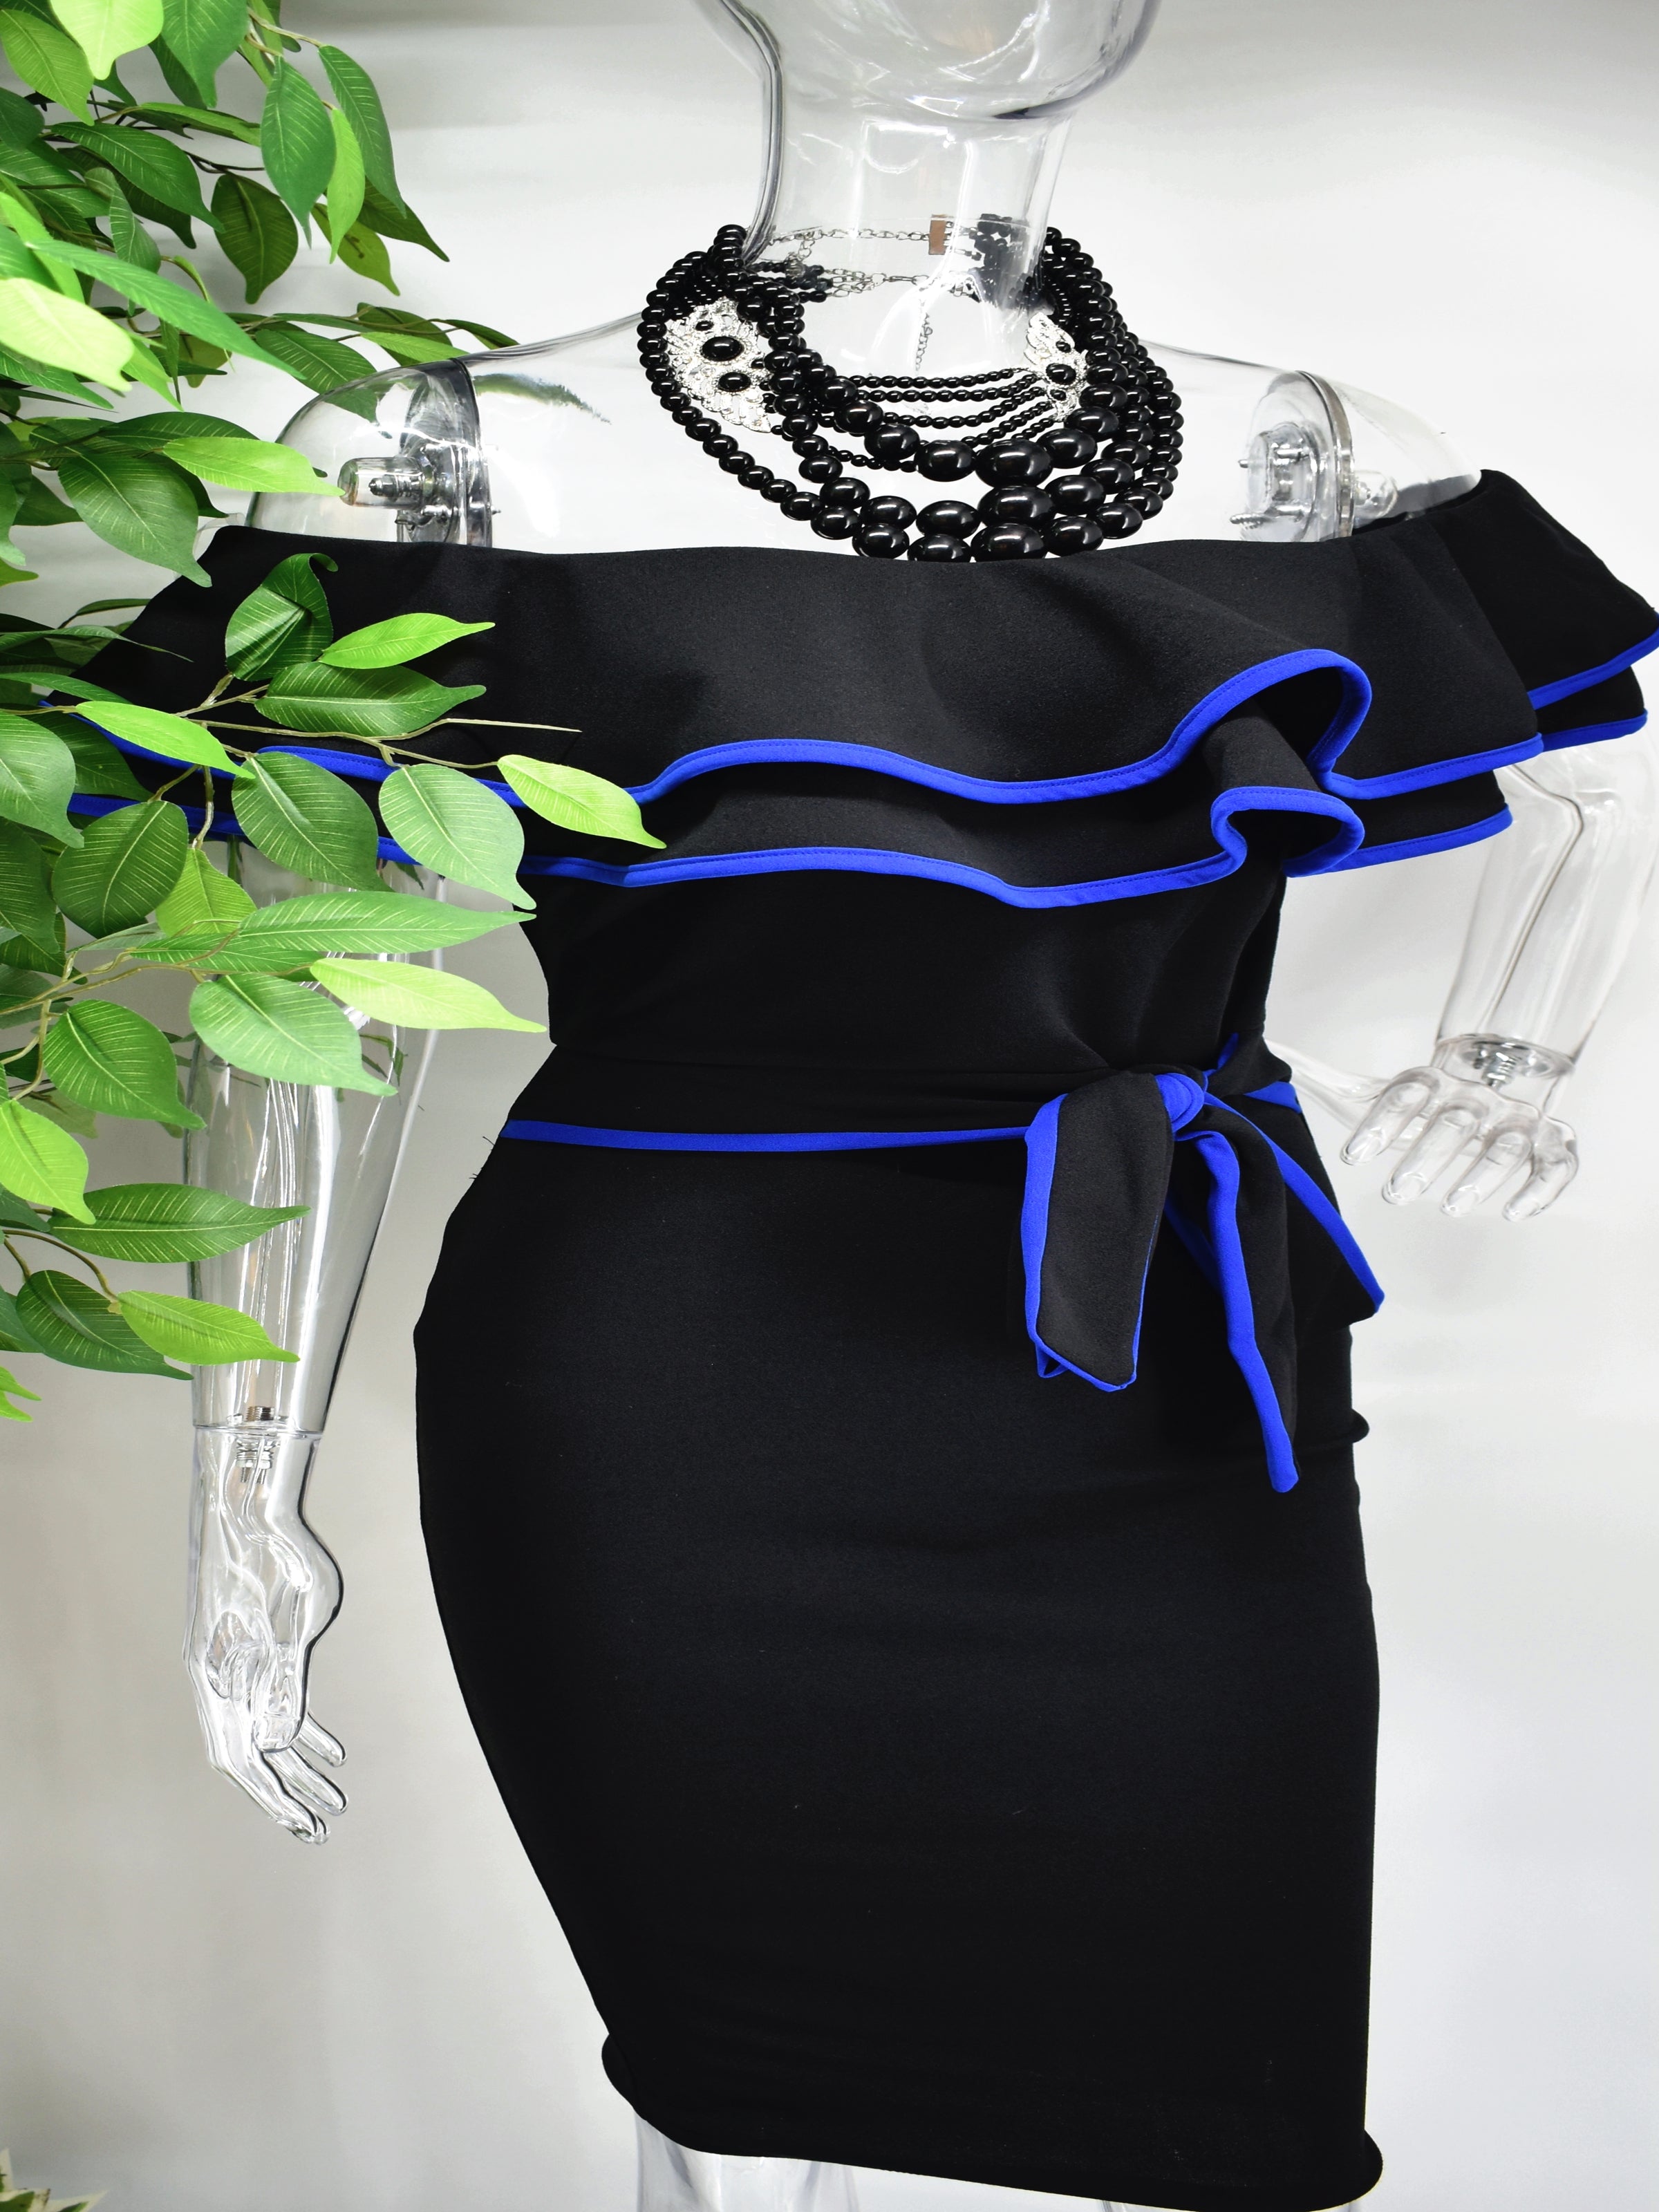 Our Berdine Black Midi Dress is picture perfect with its off the shoulder ruffled neckline and fitted bodice. The ruffled neckline and belted waist is piped with a beautiful blue.